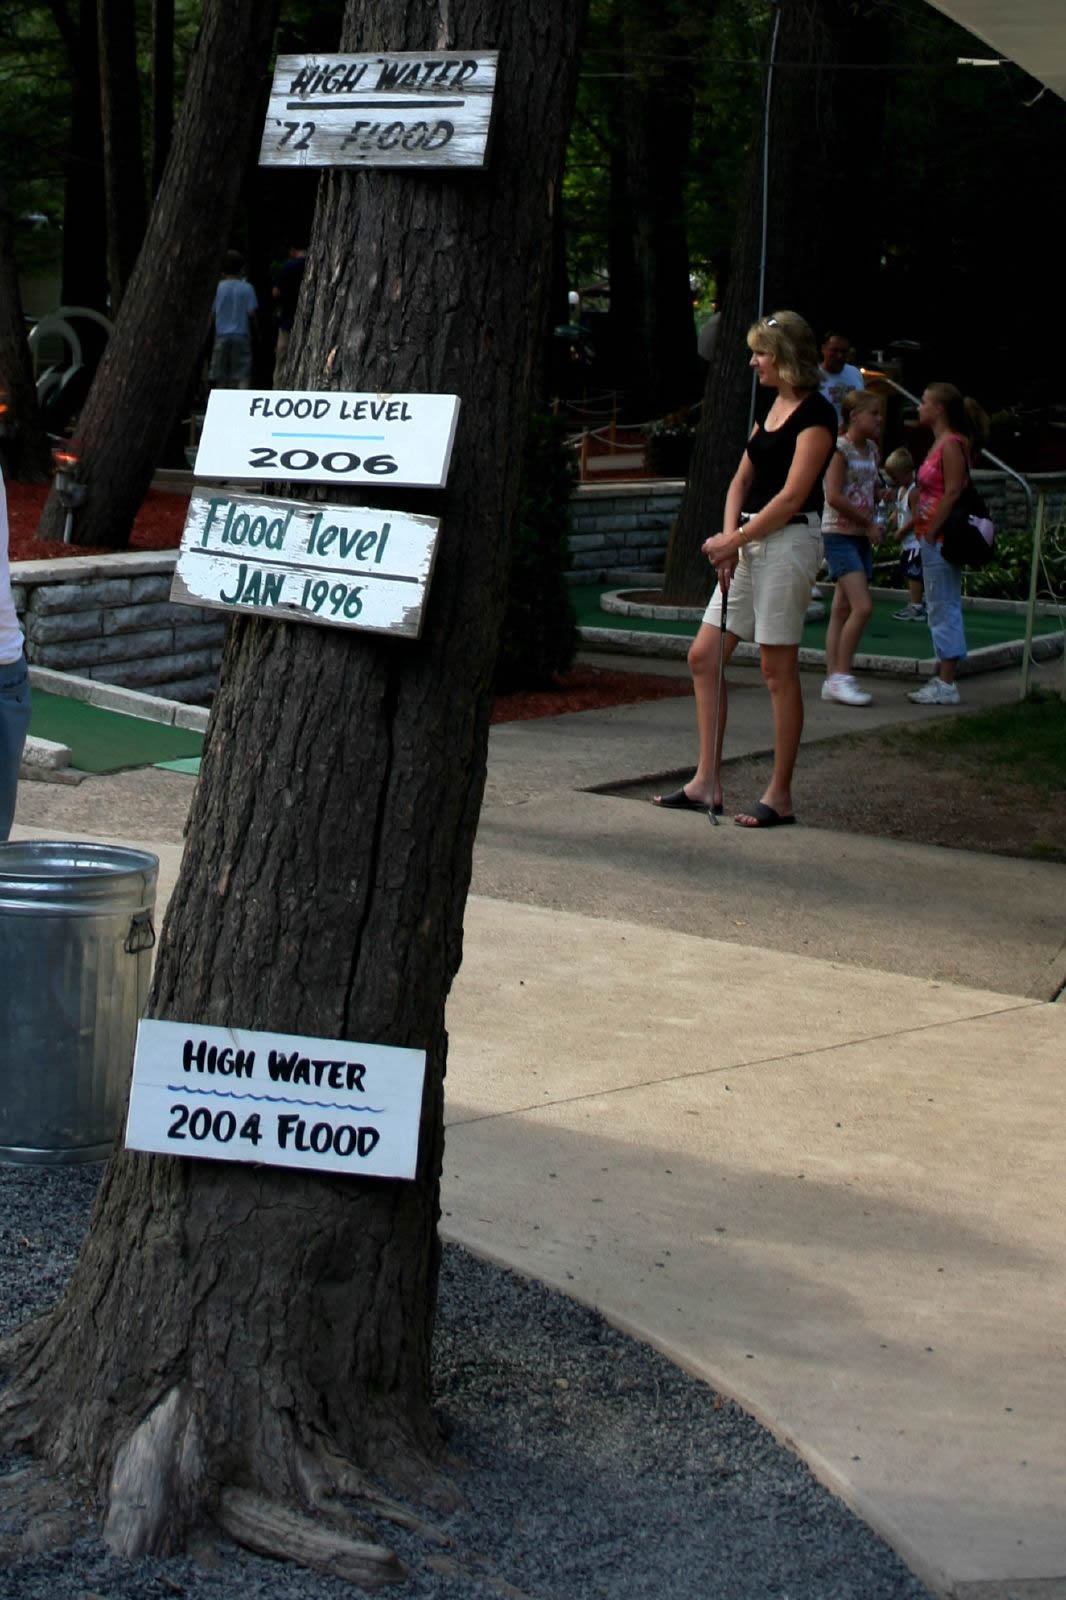 Signs showing relative water levels in floods through the years at Knoebels